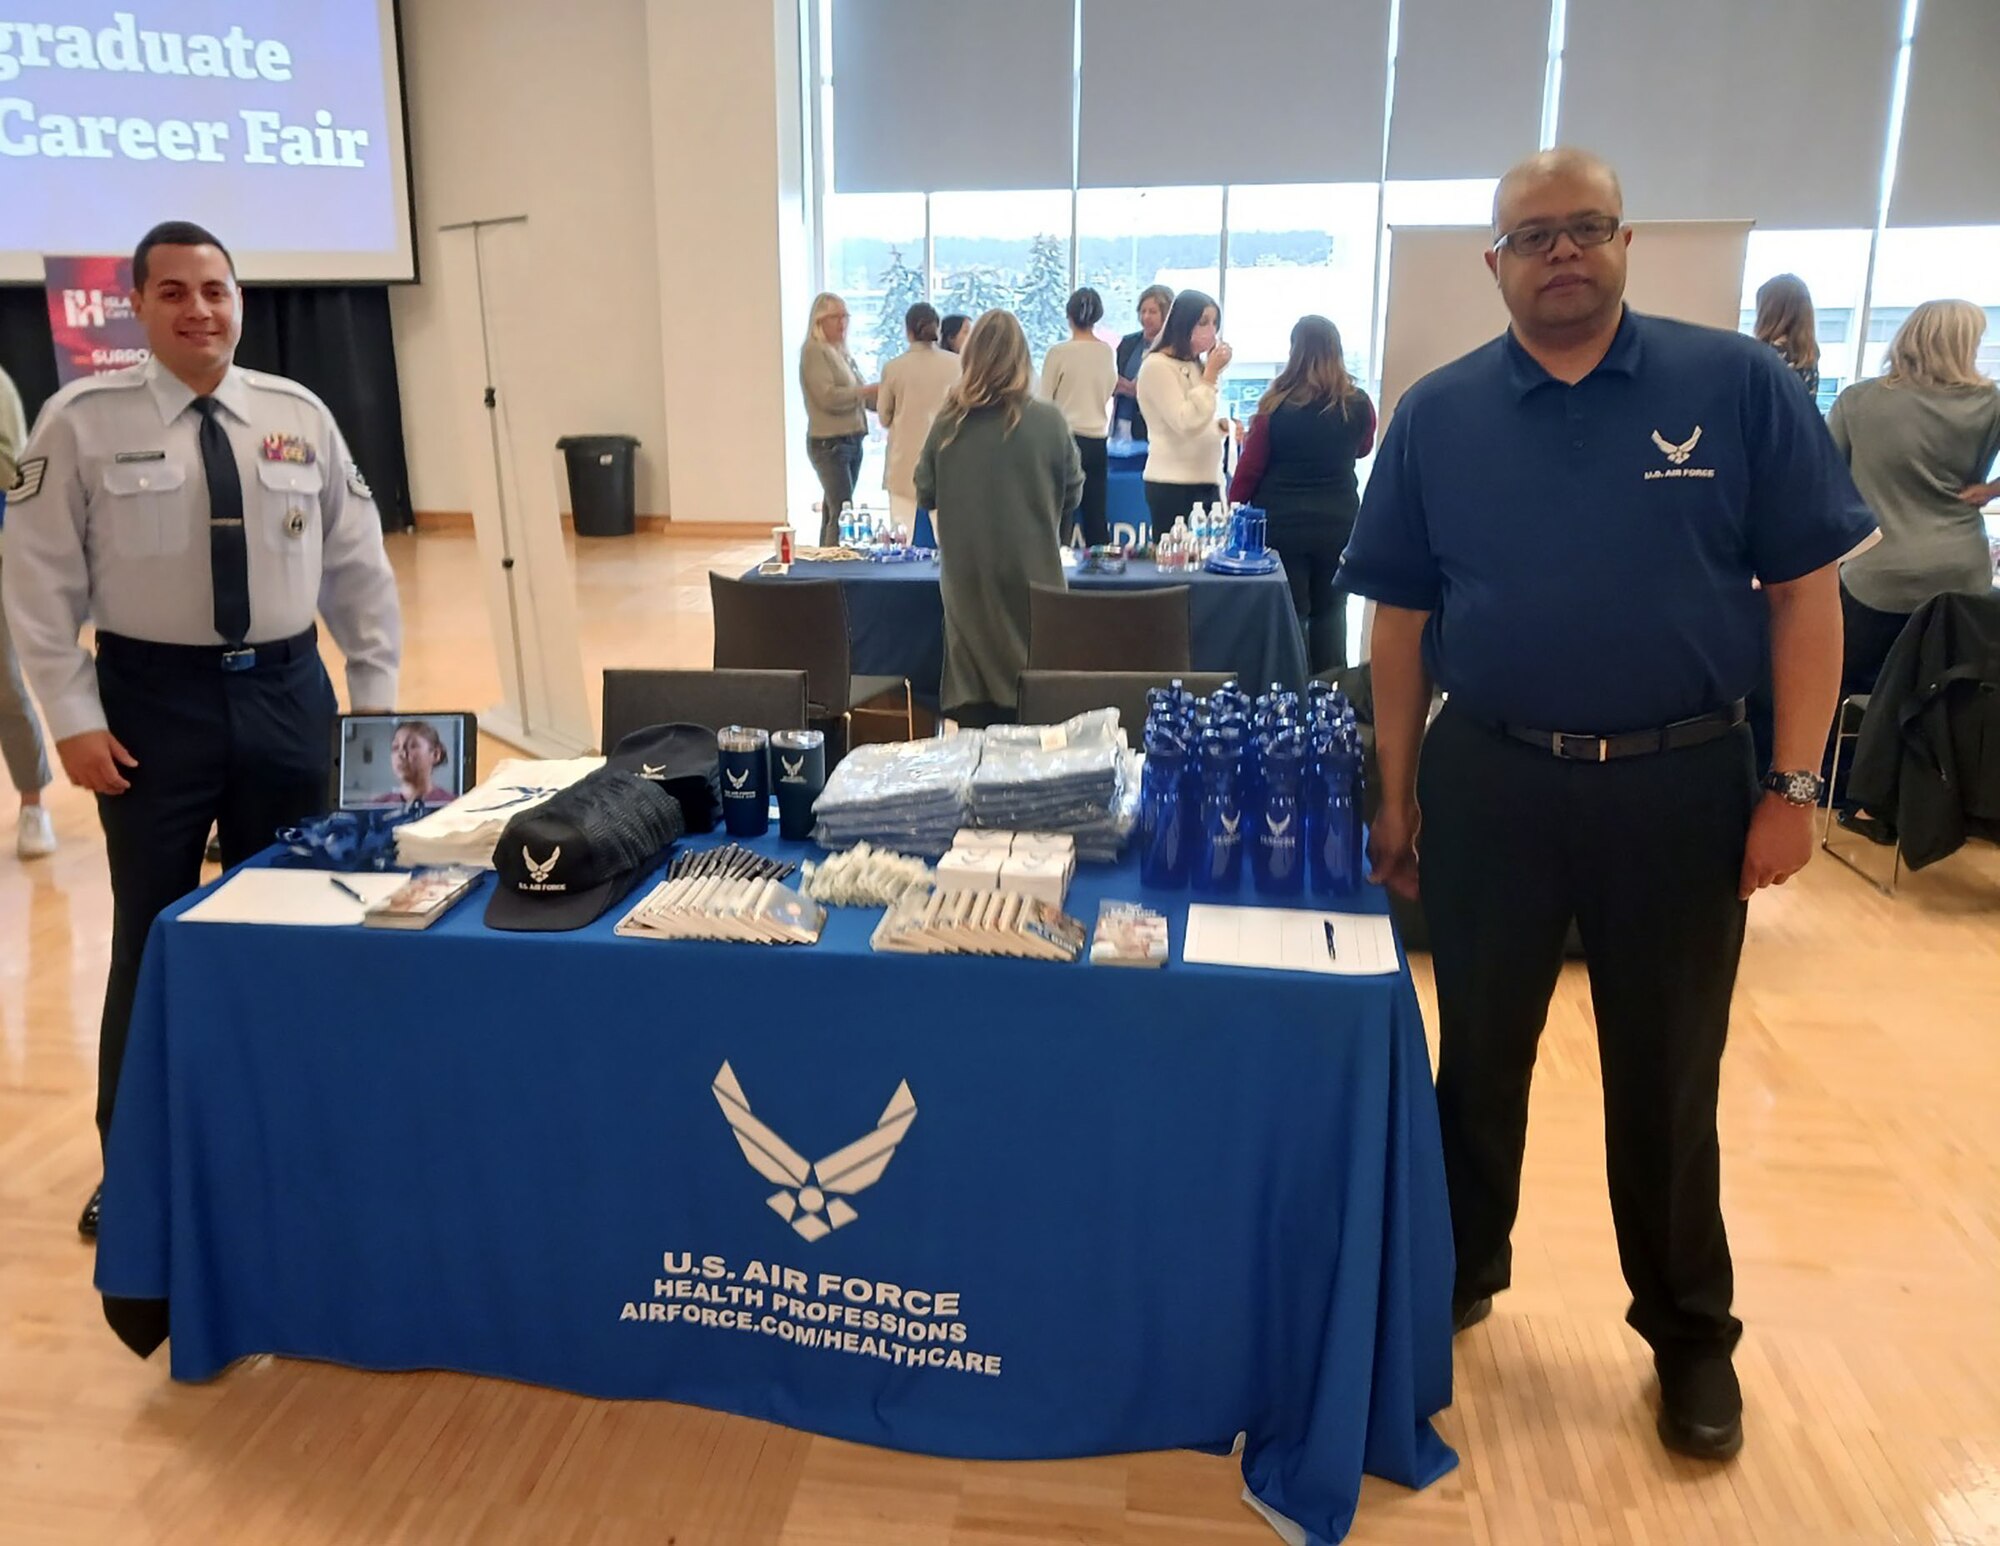 Air Force recruiting assistant and recruiter man a booth at a career fair in Washington